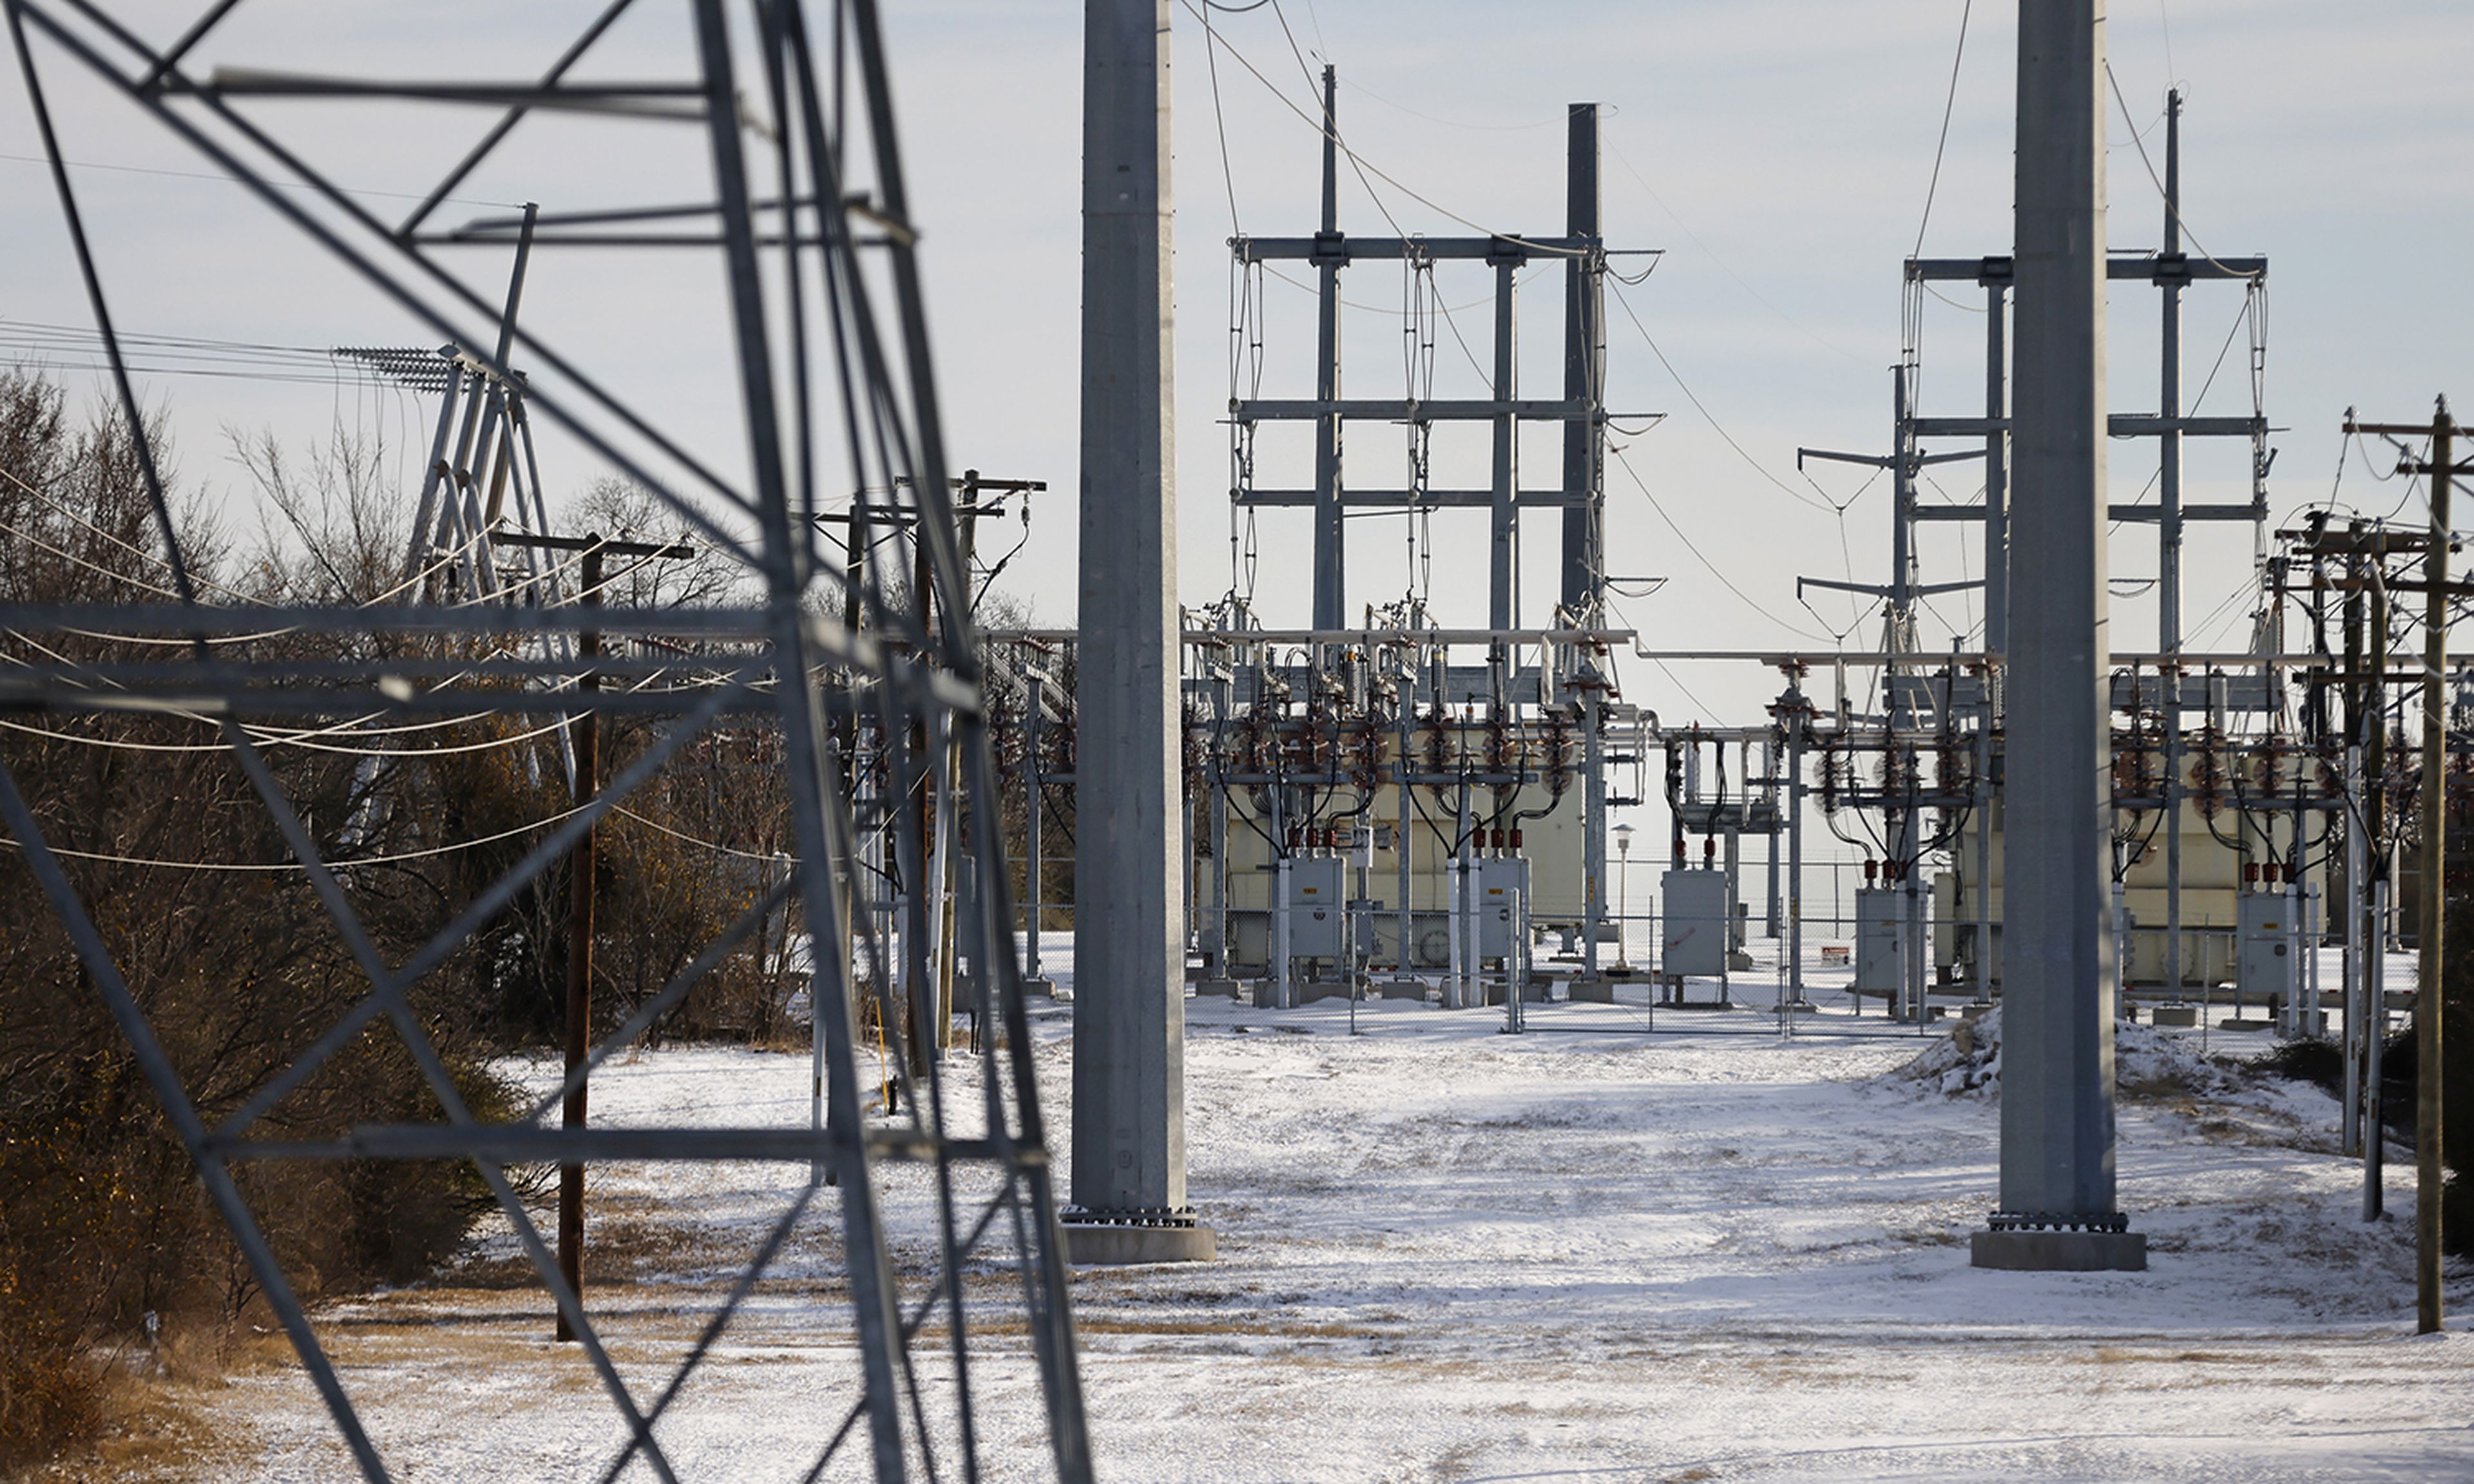 Pictured: Transmission towers and power lines lead to a substation after a snow storm on Feb. 16, 2021, in Fort Worth, Texas. (Photo by Ron Jenkins/Getty Images)